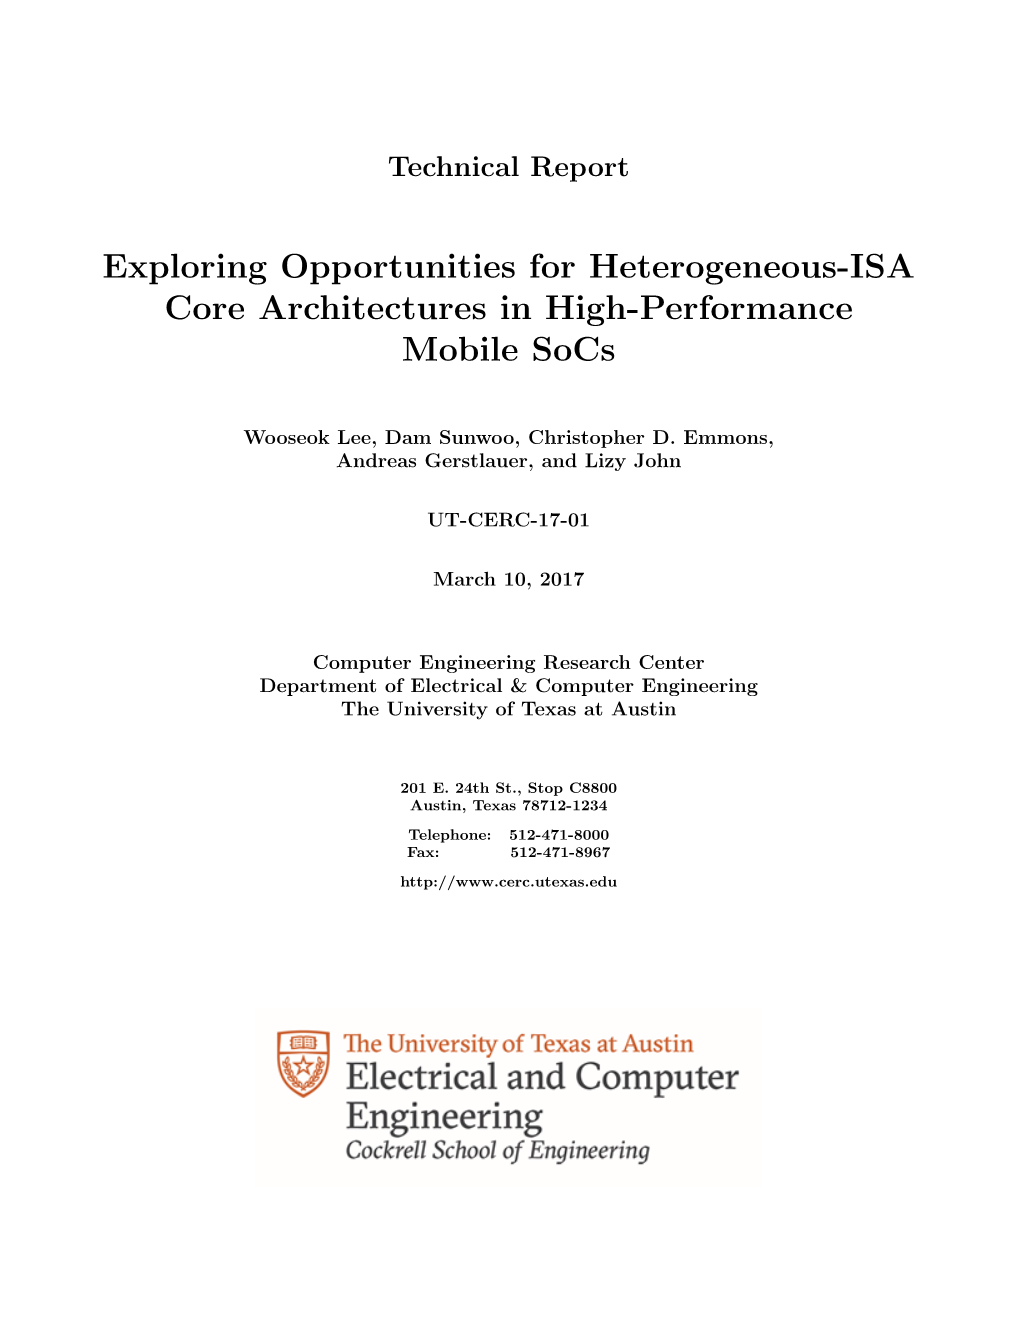 Exploring Opportunities for Heterogeneous-ISA Core Architectures in High-Performance Mobile Socs